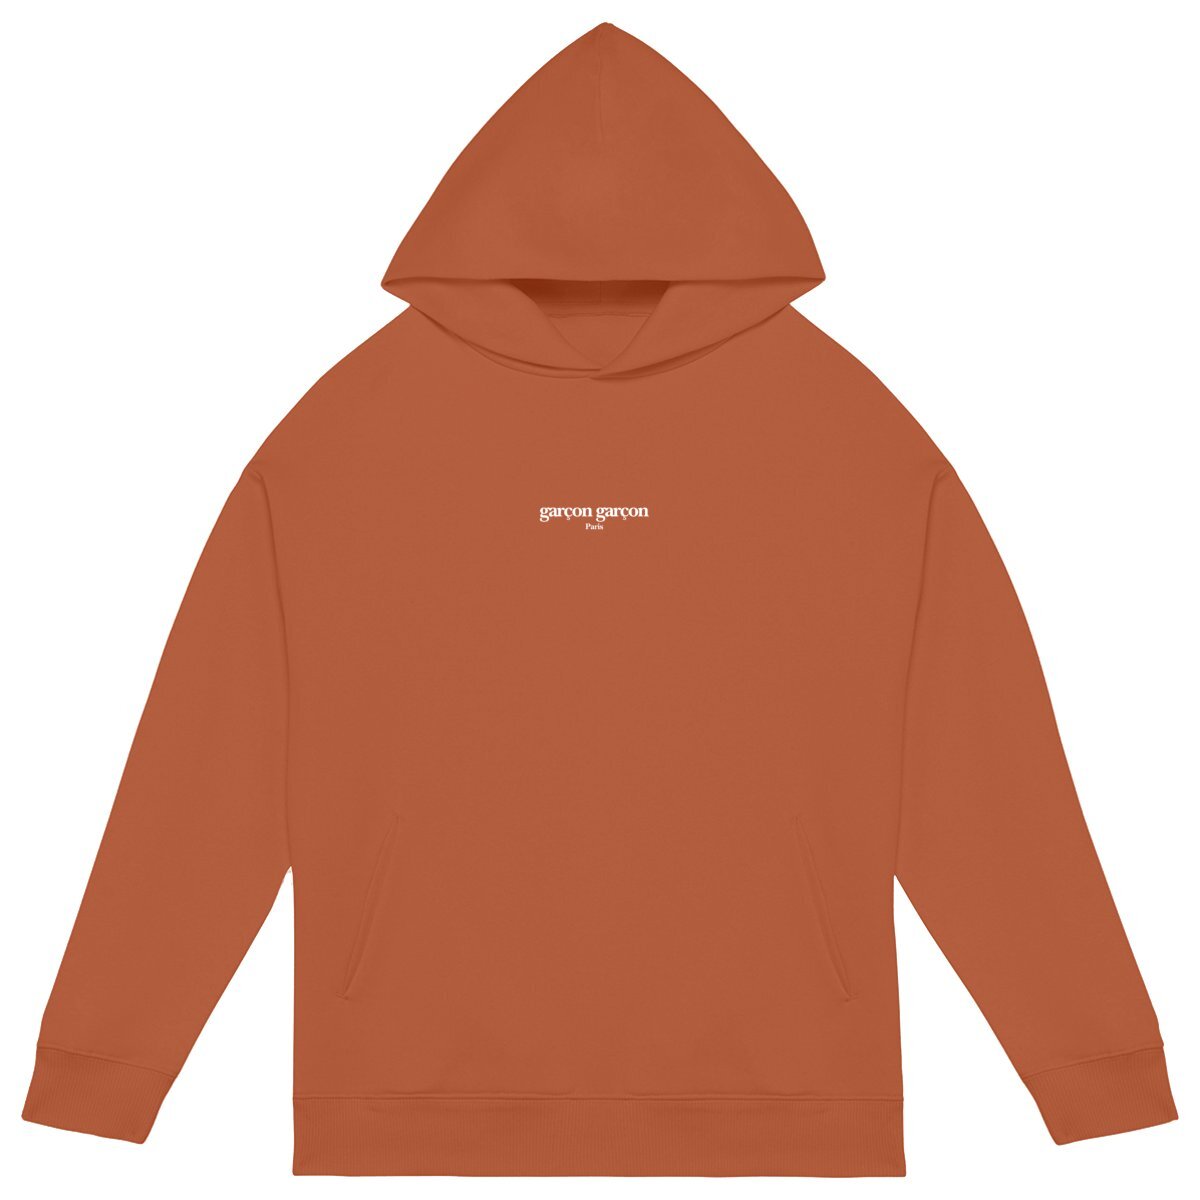  garçon garçon essentiel oversized hoodie. Sleek in orange and whispering Parisian chic, this hoodie is the sartorial whisper of 'garçon garçon' — a statement of understated elegance. Perfect for those who carry a piece of Paris in their hearts and a touch of audacity on their sleeves.